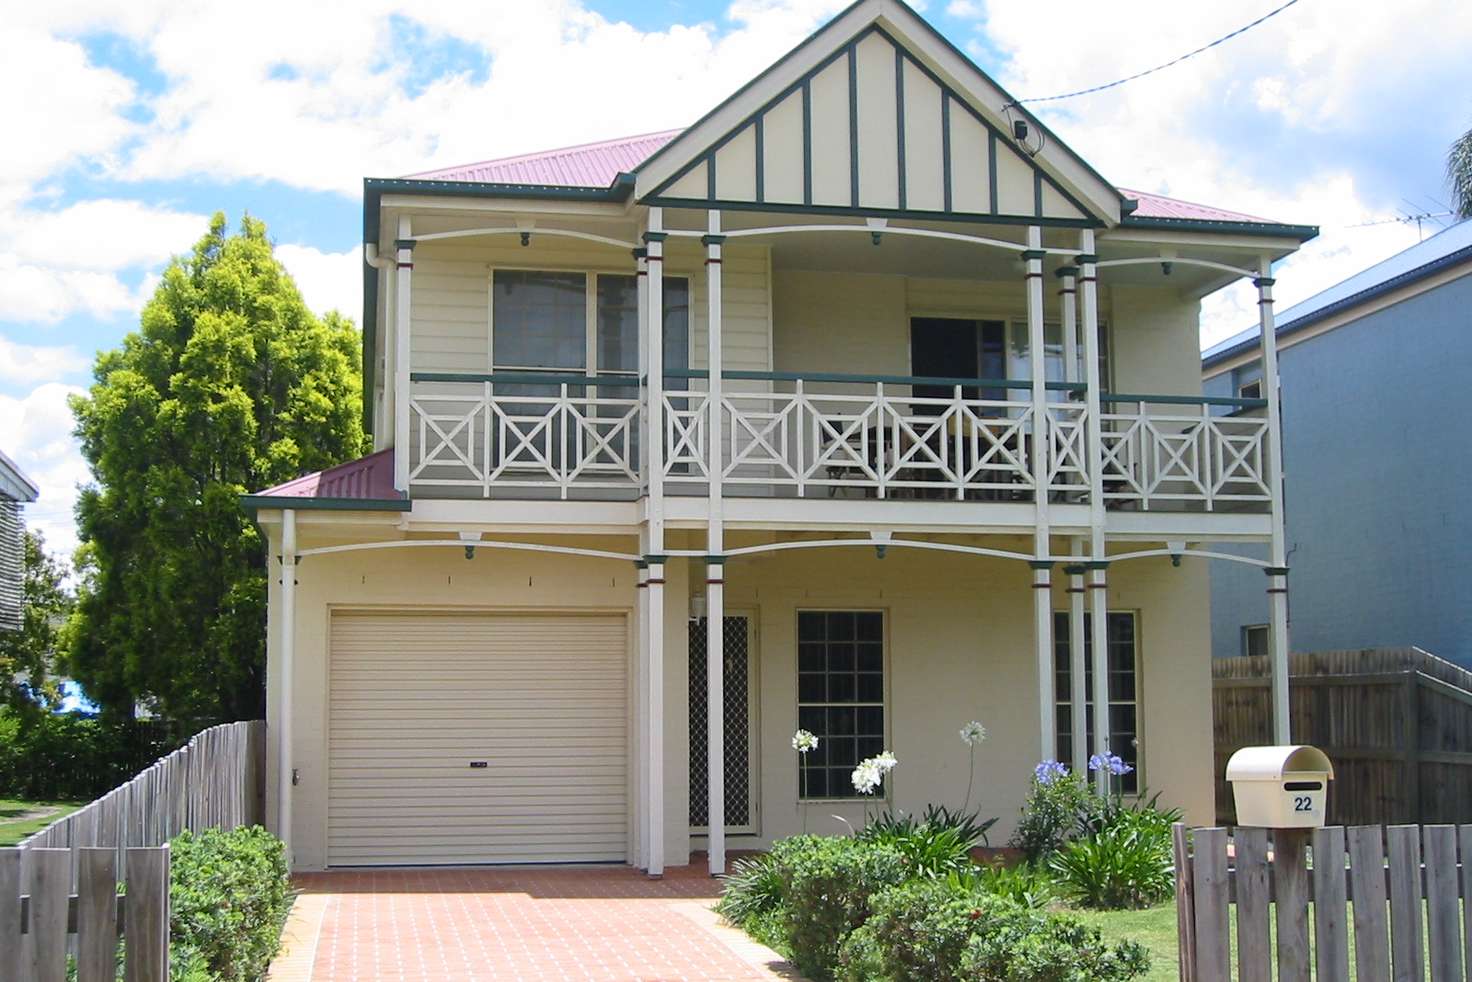 Main view of Homely house listing, 22 Strong Avenue, Graceville QLD 4075